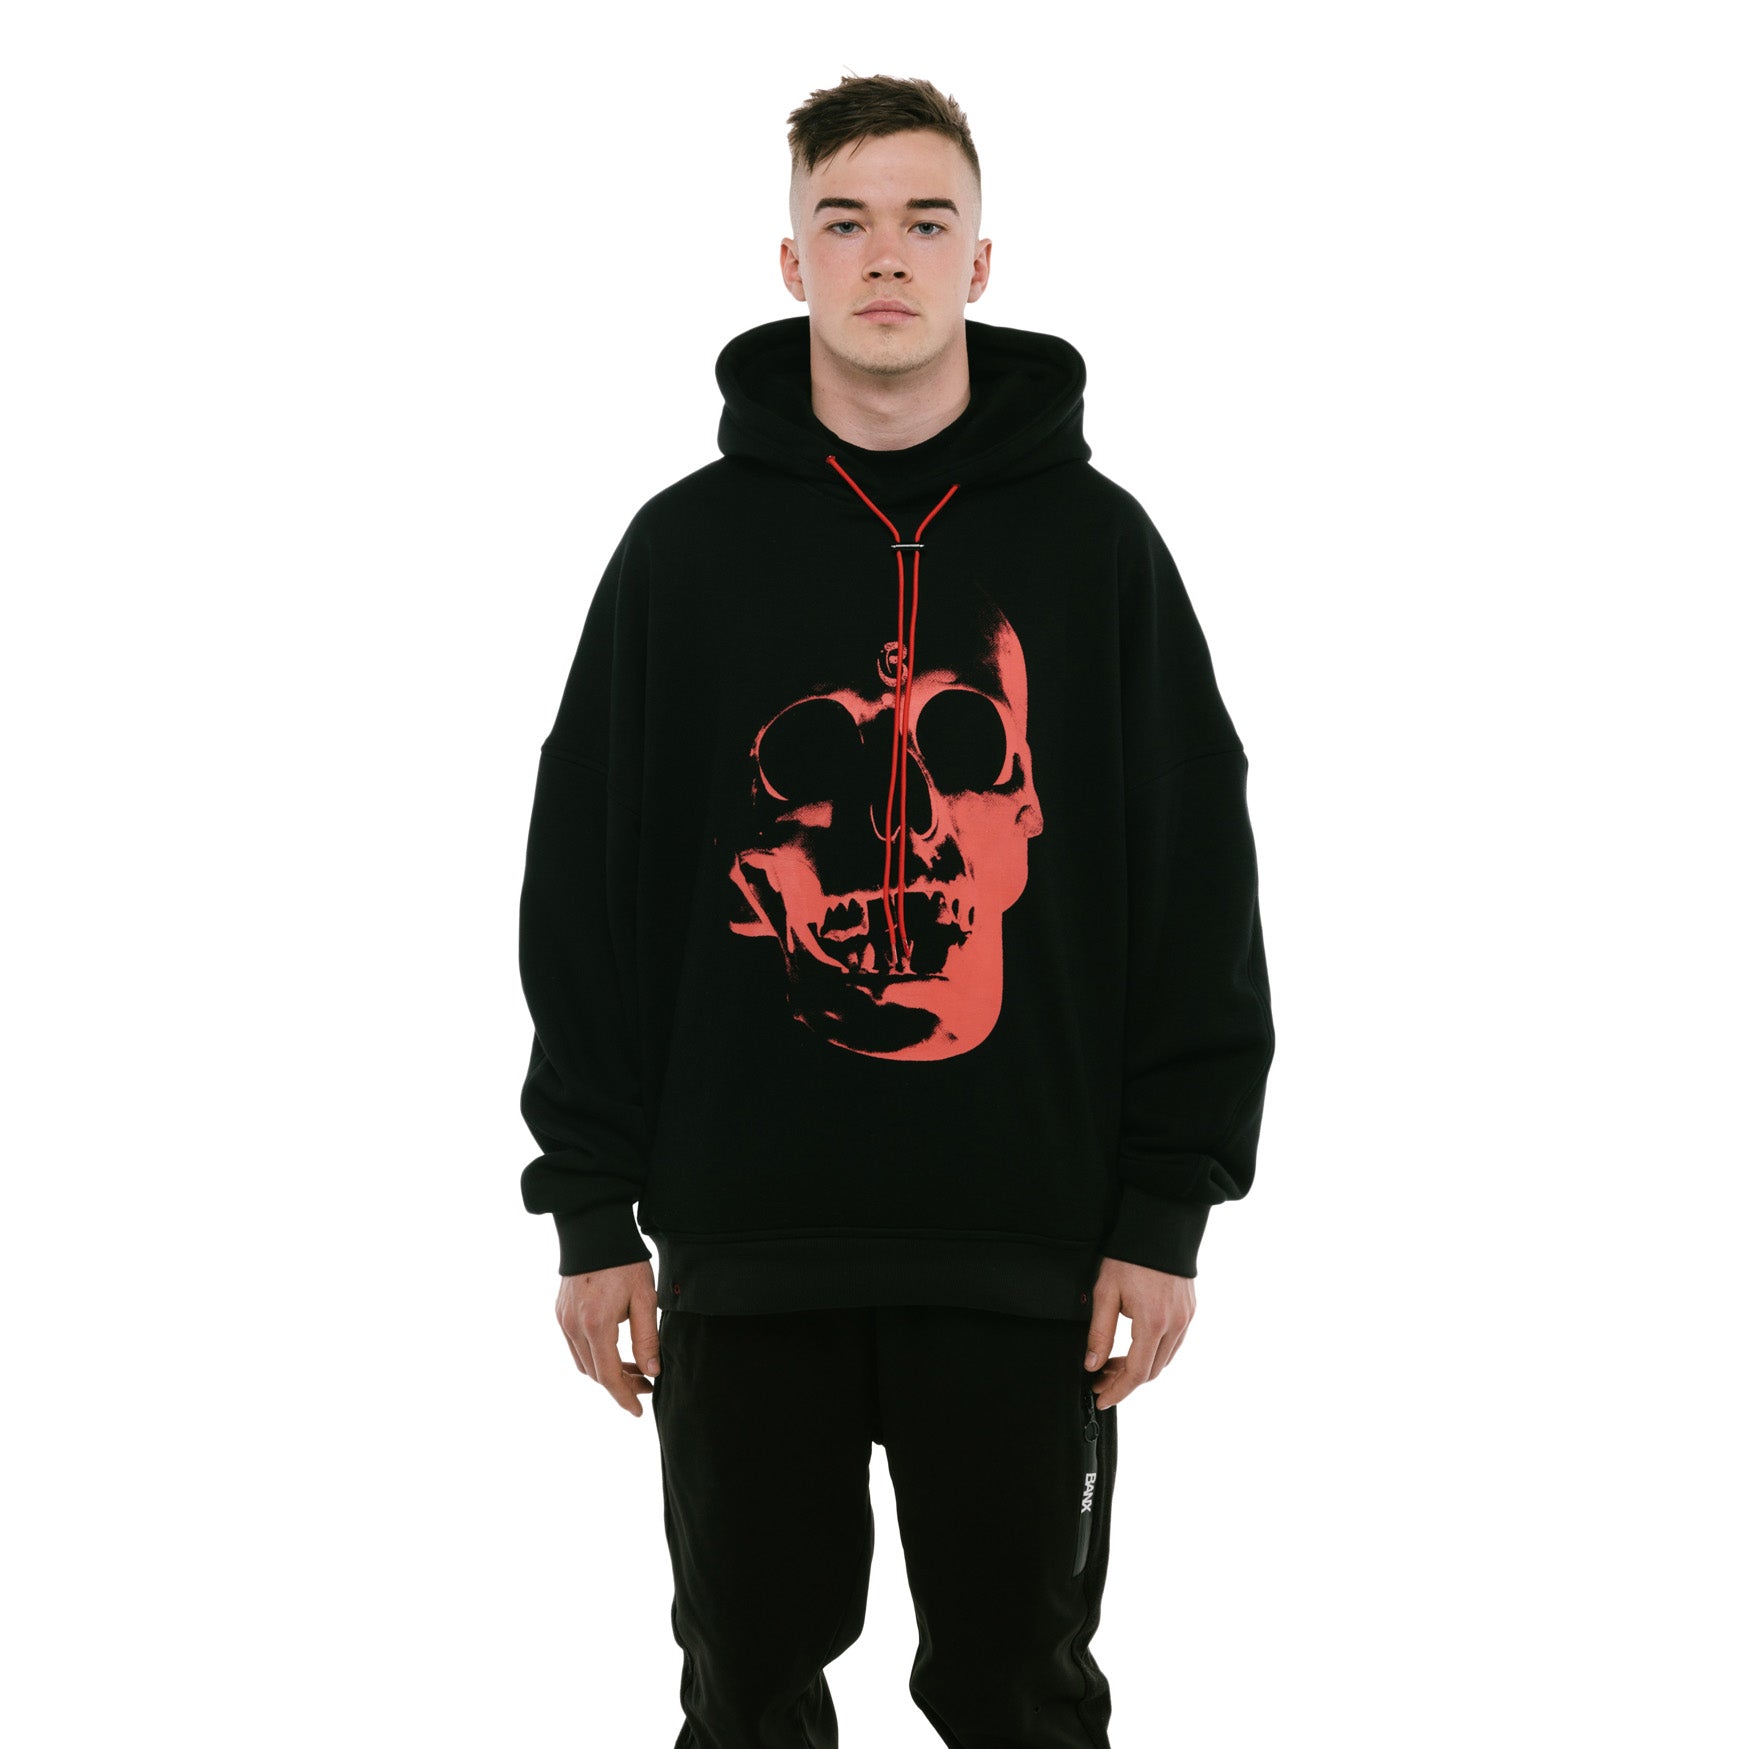 “FIVE YEARS OF THE VISION” Oversized Hoodie